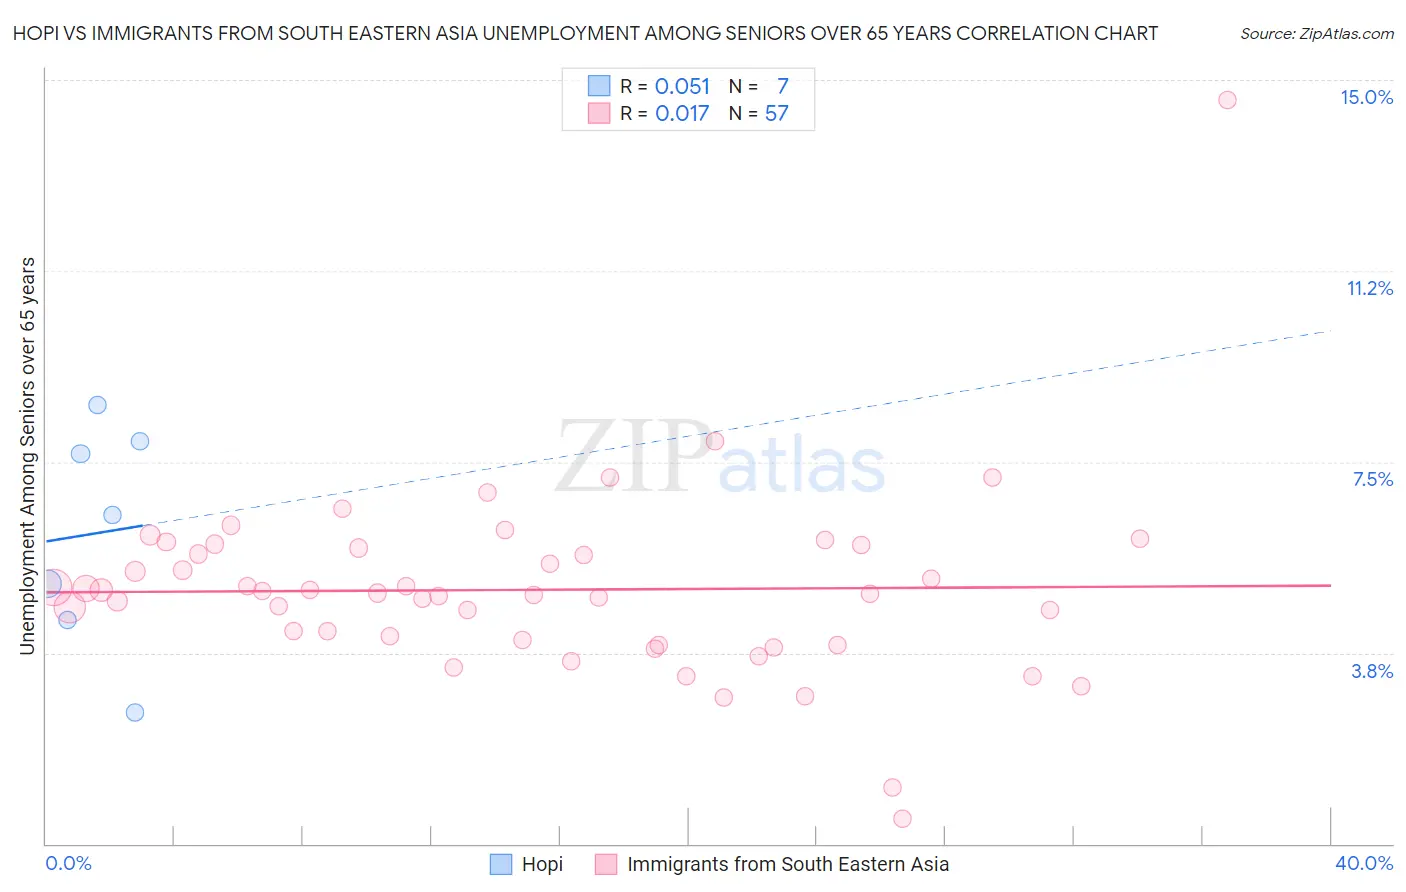 Hopi vs Immigrants from South Eastern Asia Unemployment Among Seniors over 65 years